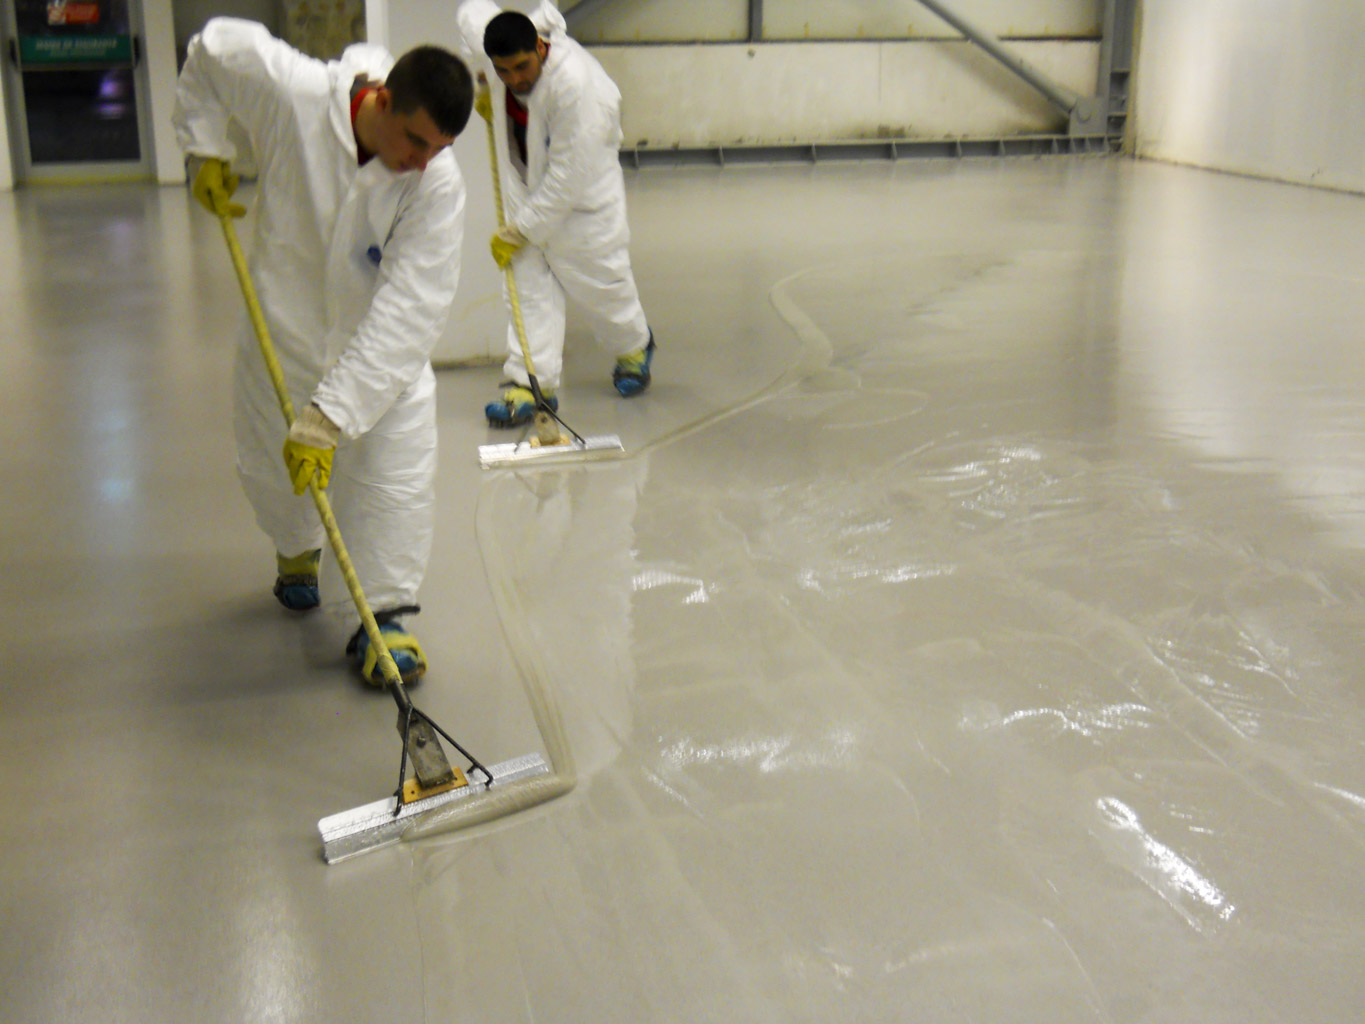 IKEA - Retail and Commercial Epoxy Flooring